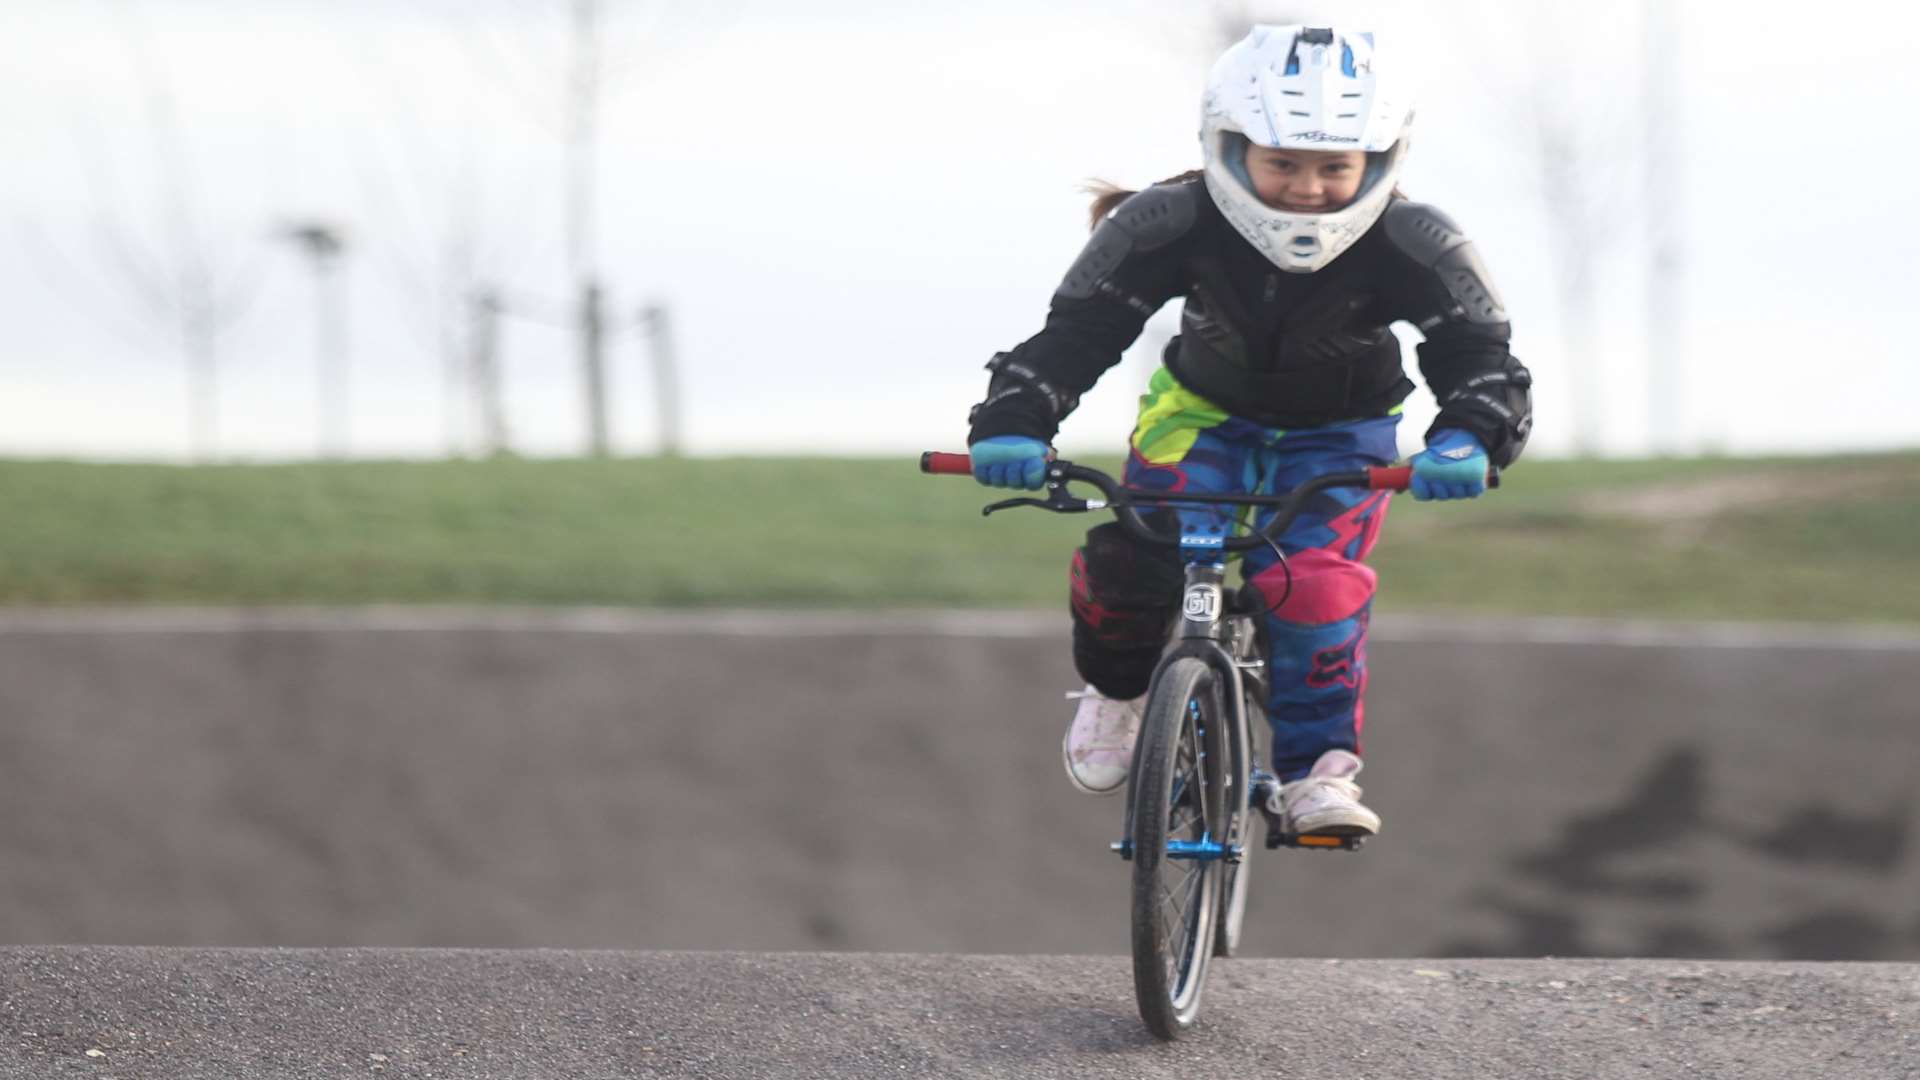 The cafe will open at Cyclopark where young Teagan Jacobs is pictured. Picture: John Westhrop